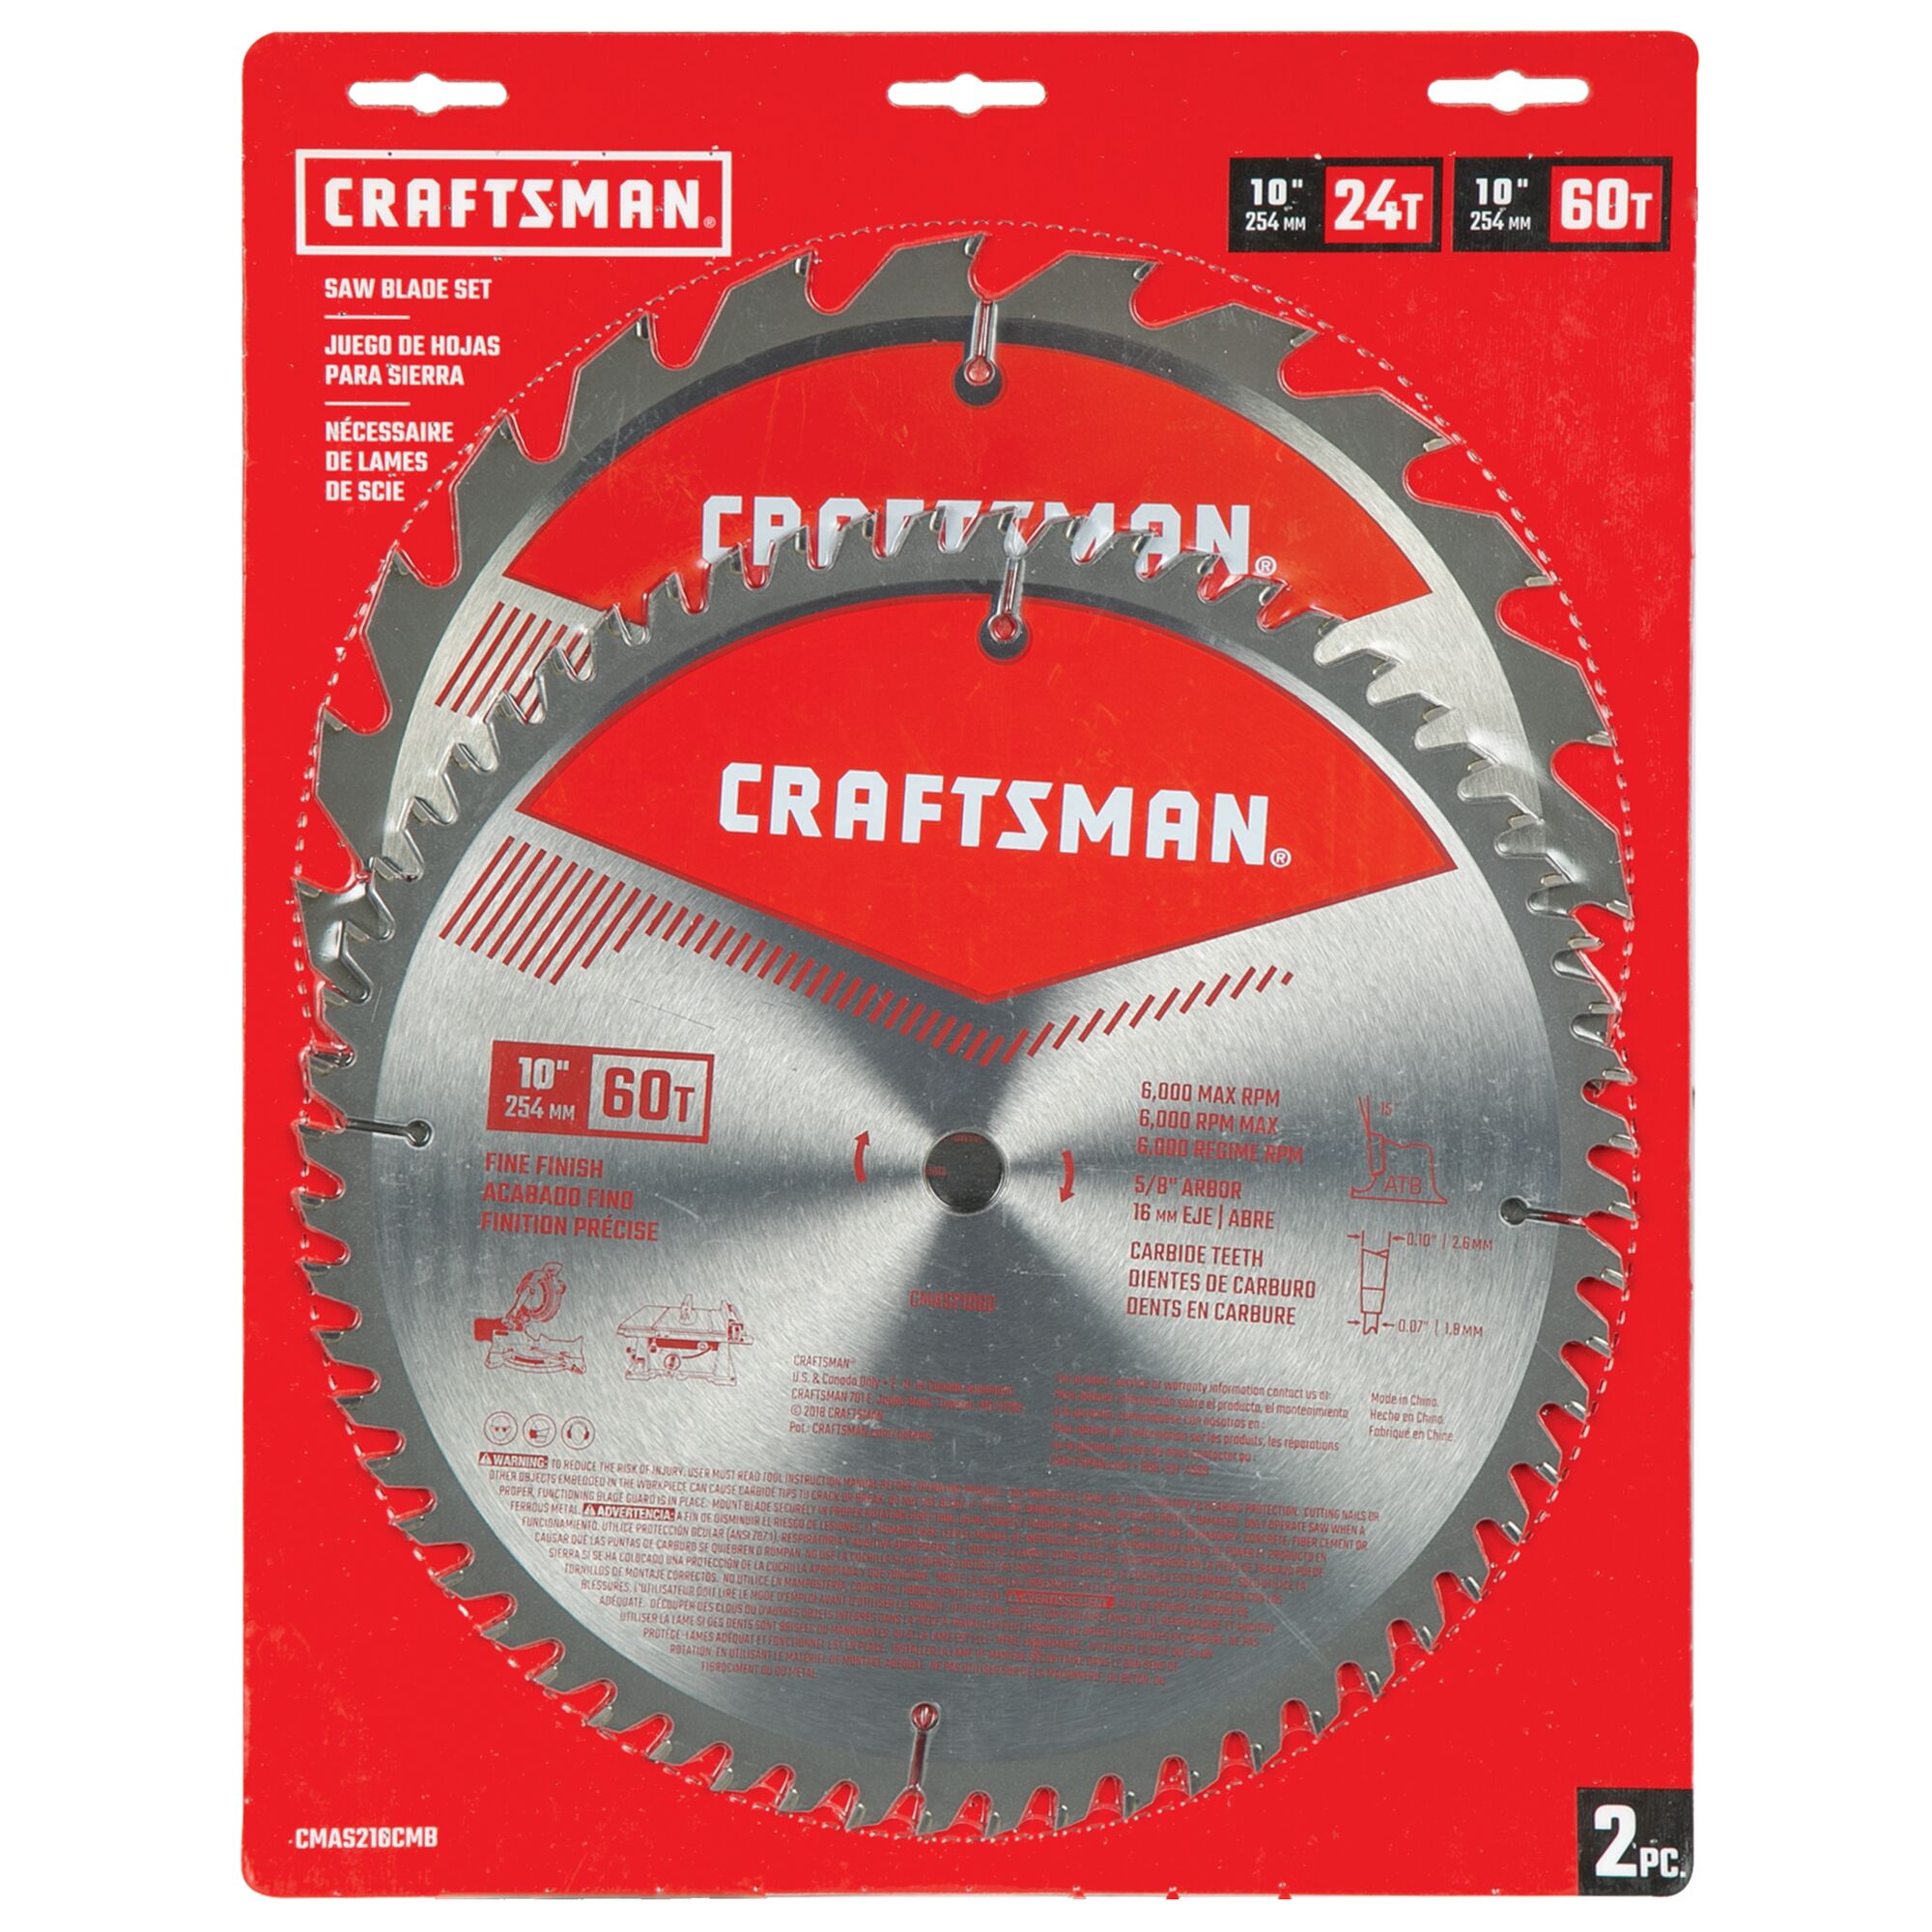 View of CRAFTSMAN Blades: Table Saw highlighting product features